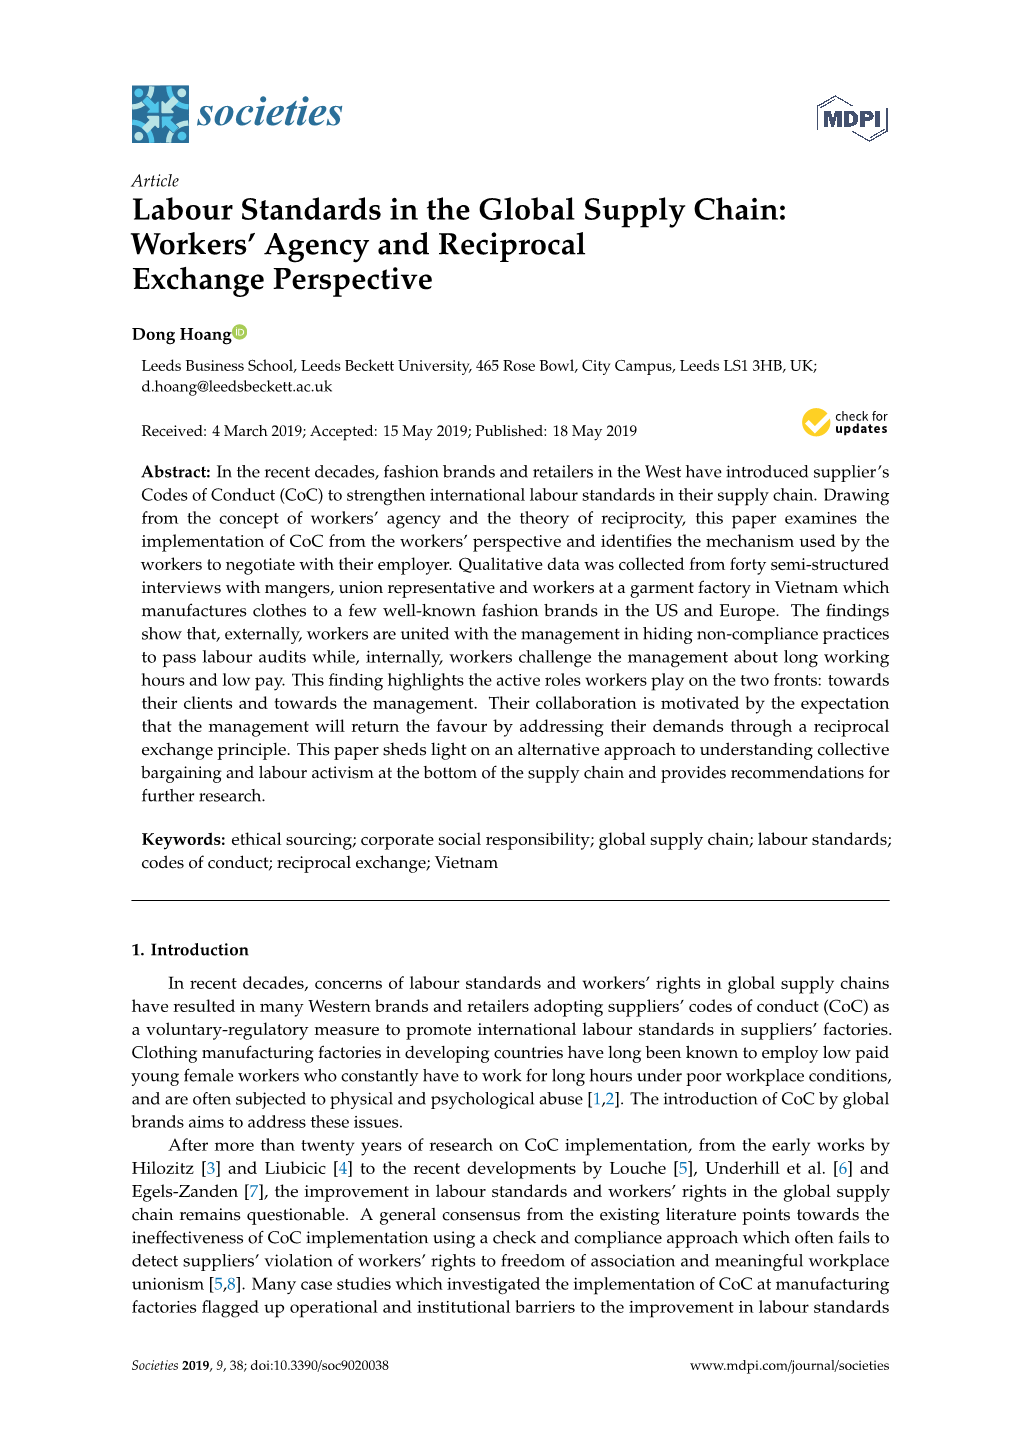 Labour Standards in the Global Supply Chain: Workers’ Agency and Reciprocal Exchange Perspective